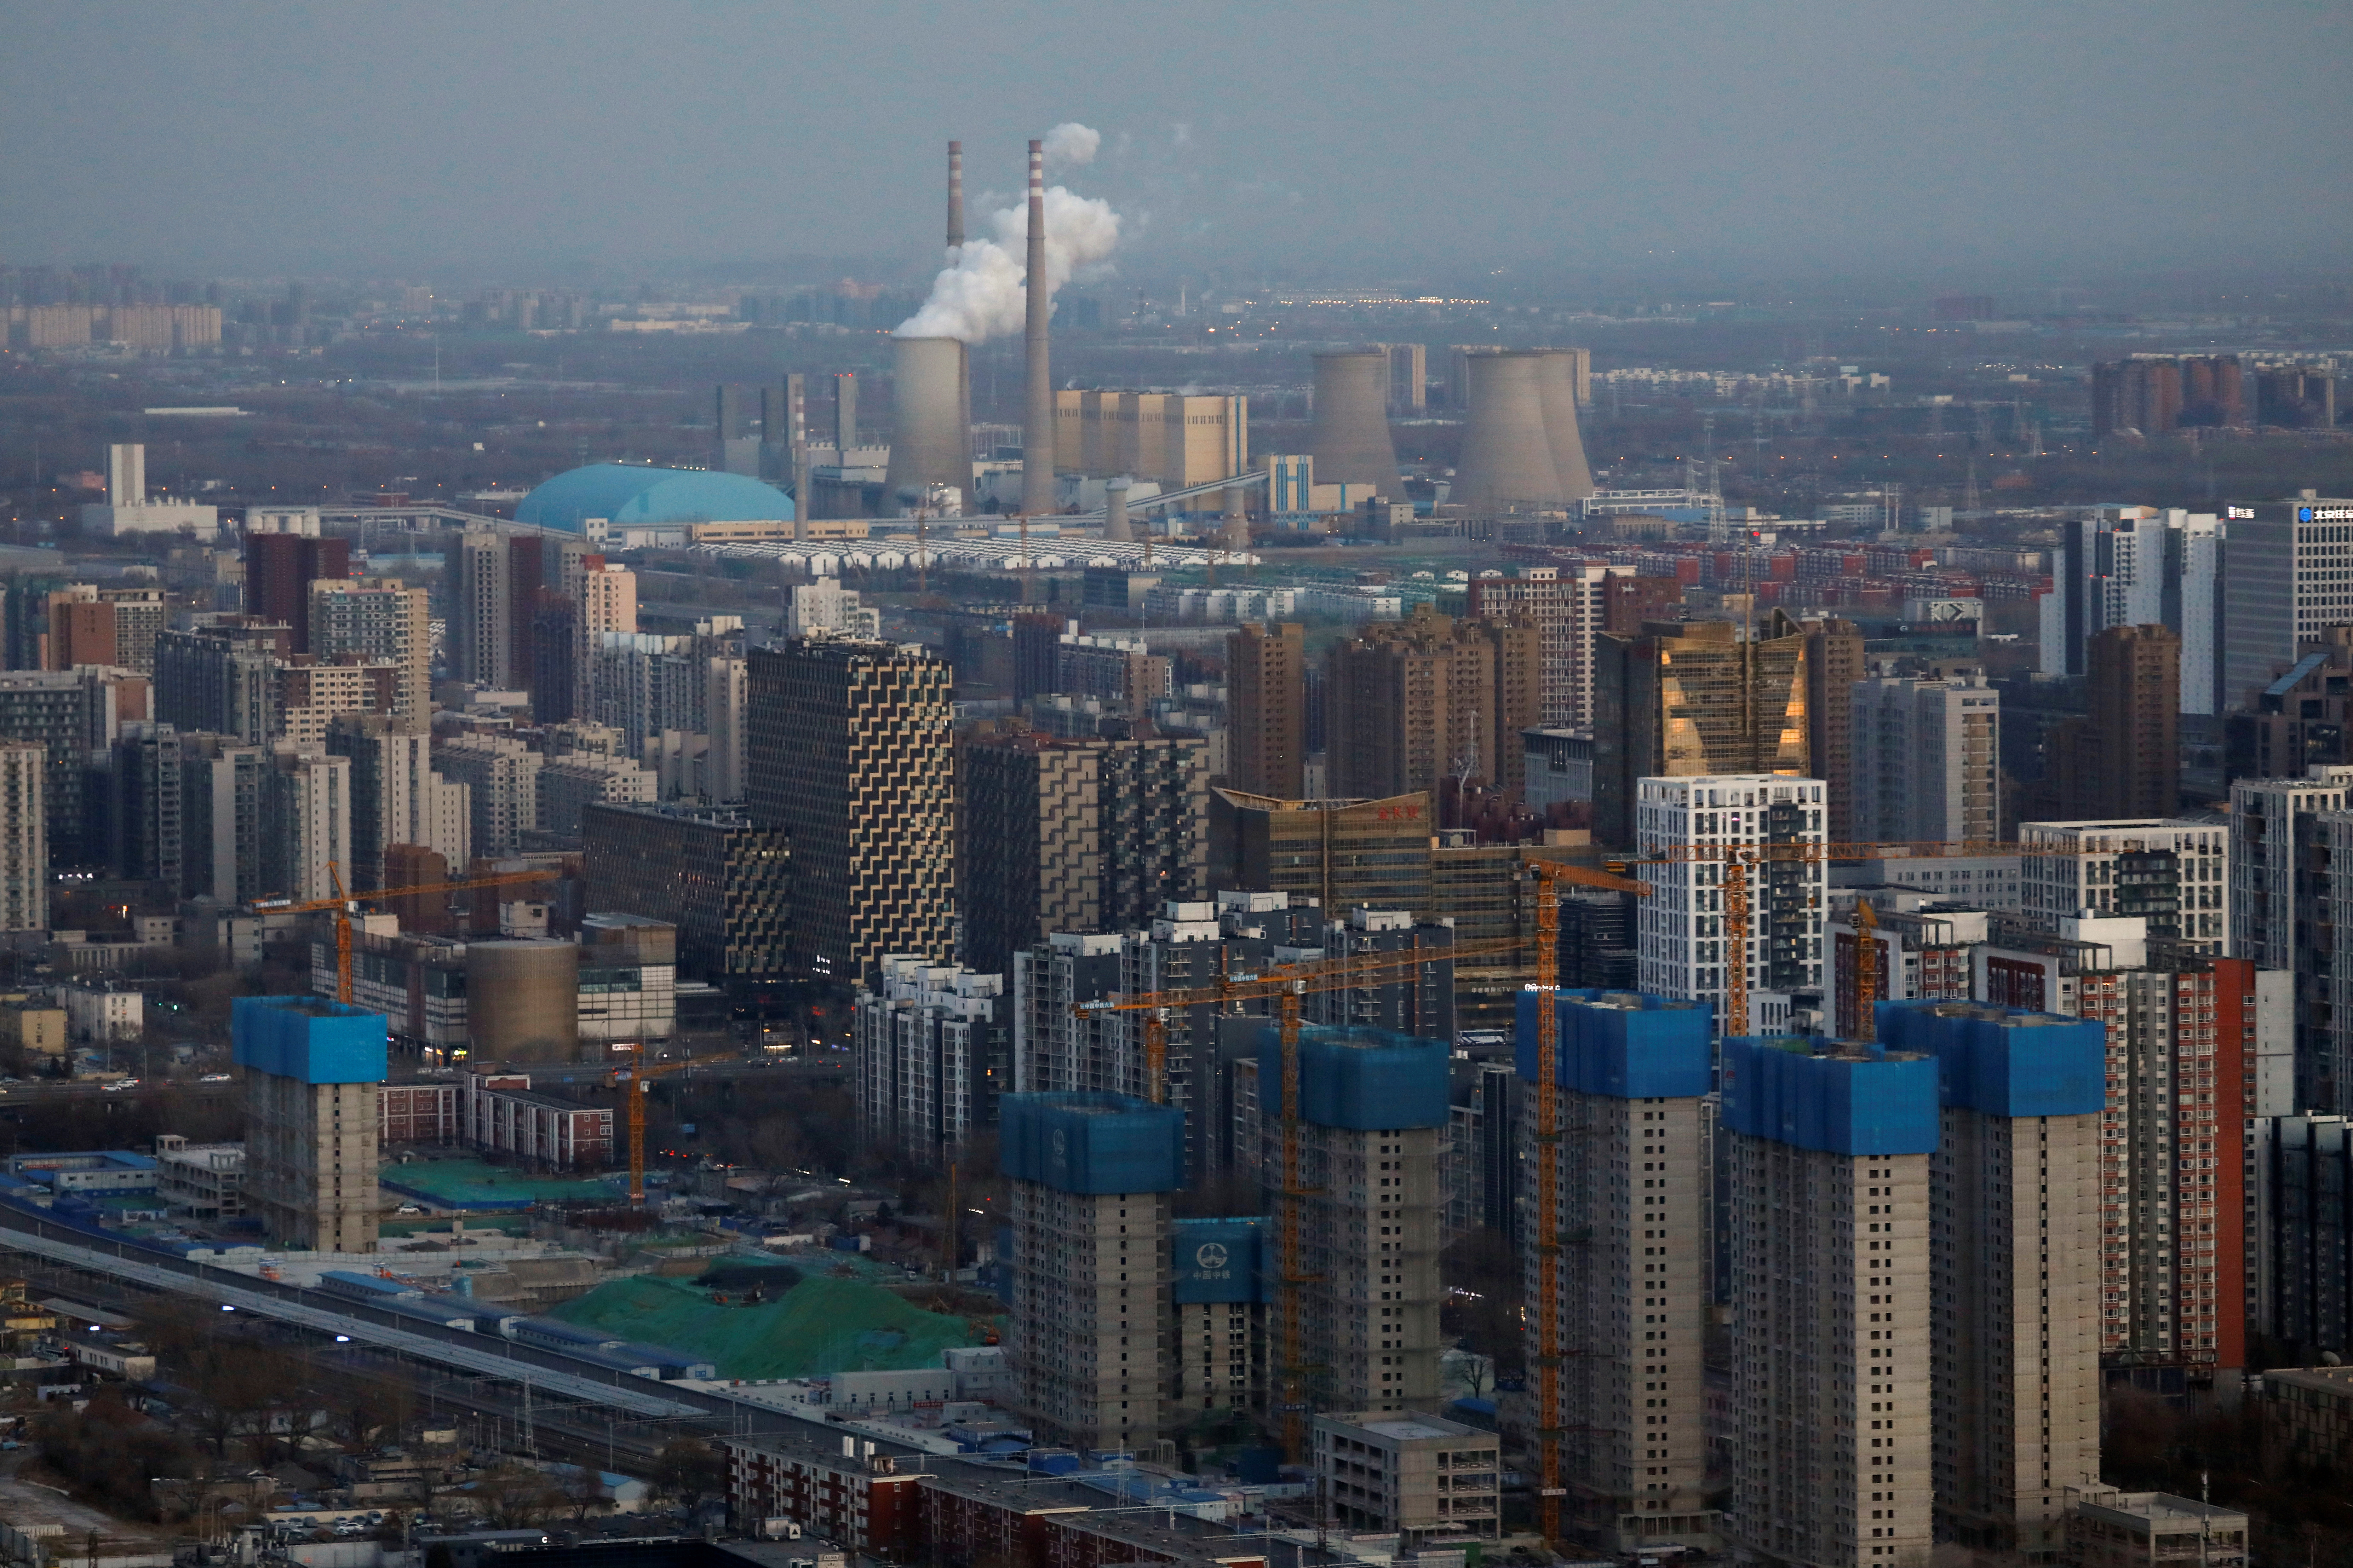 Residential buildings under construction are seen near the central business district (CBD) in Beijing